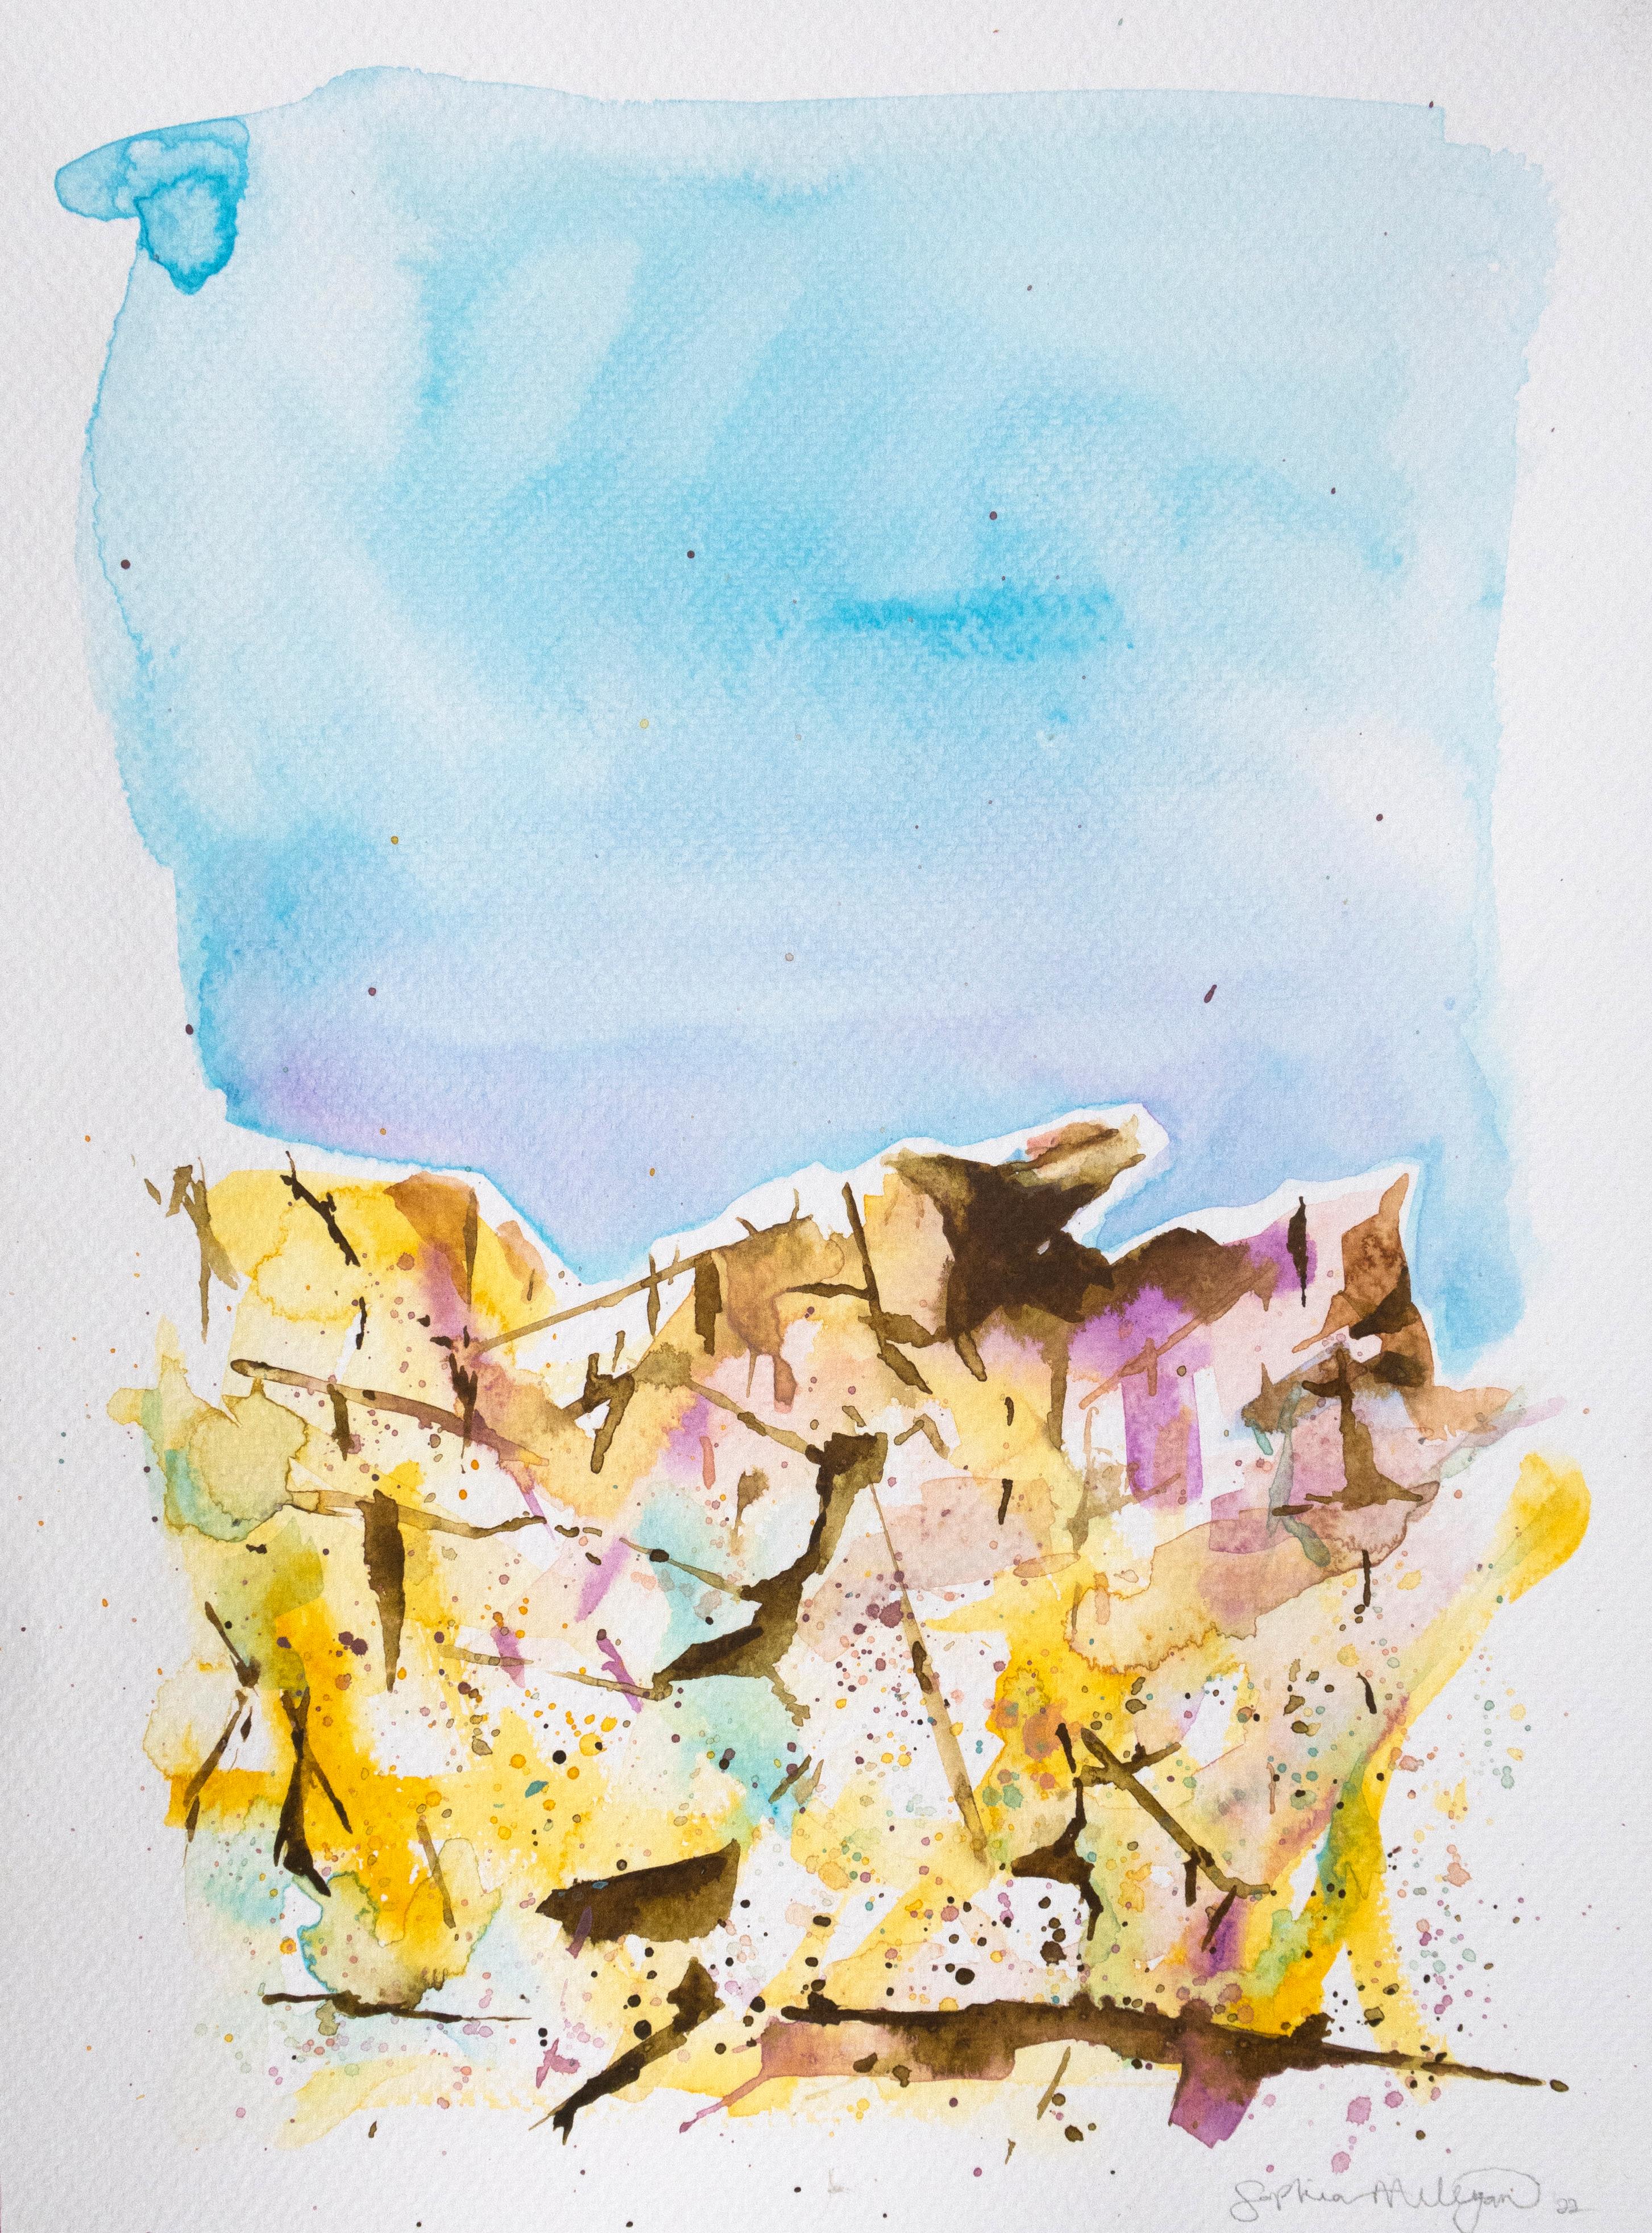 'Prye' Contemporary landscape blue sky, yellow stone, earth and air - Painting by Sophia Milligan